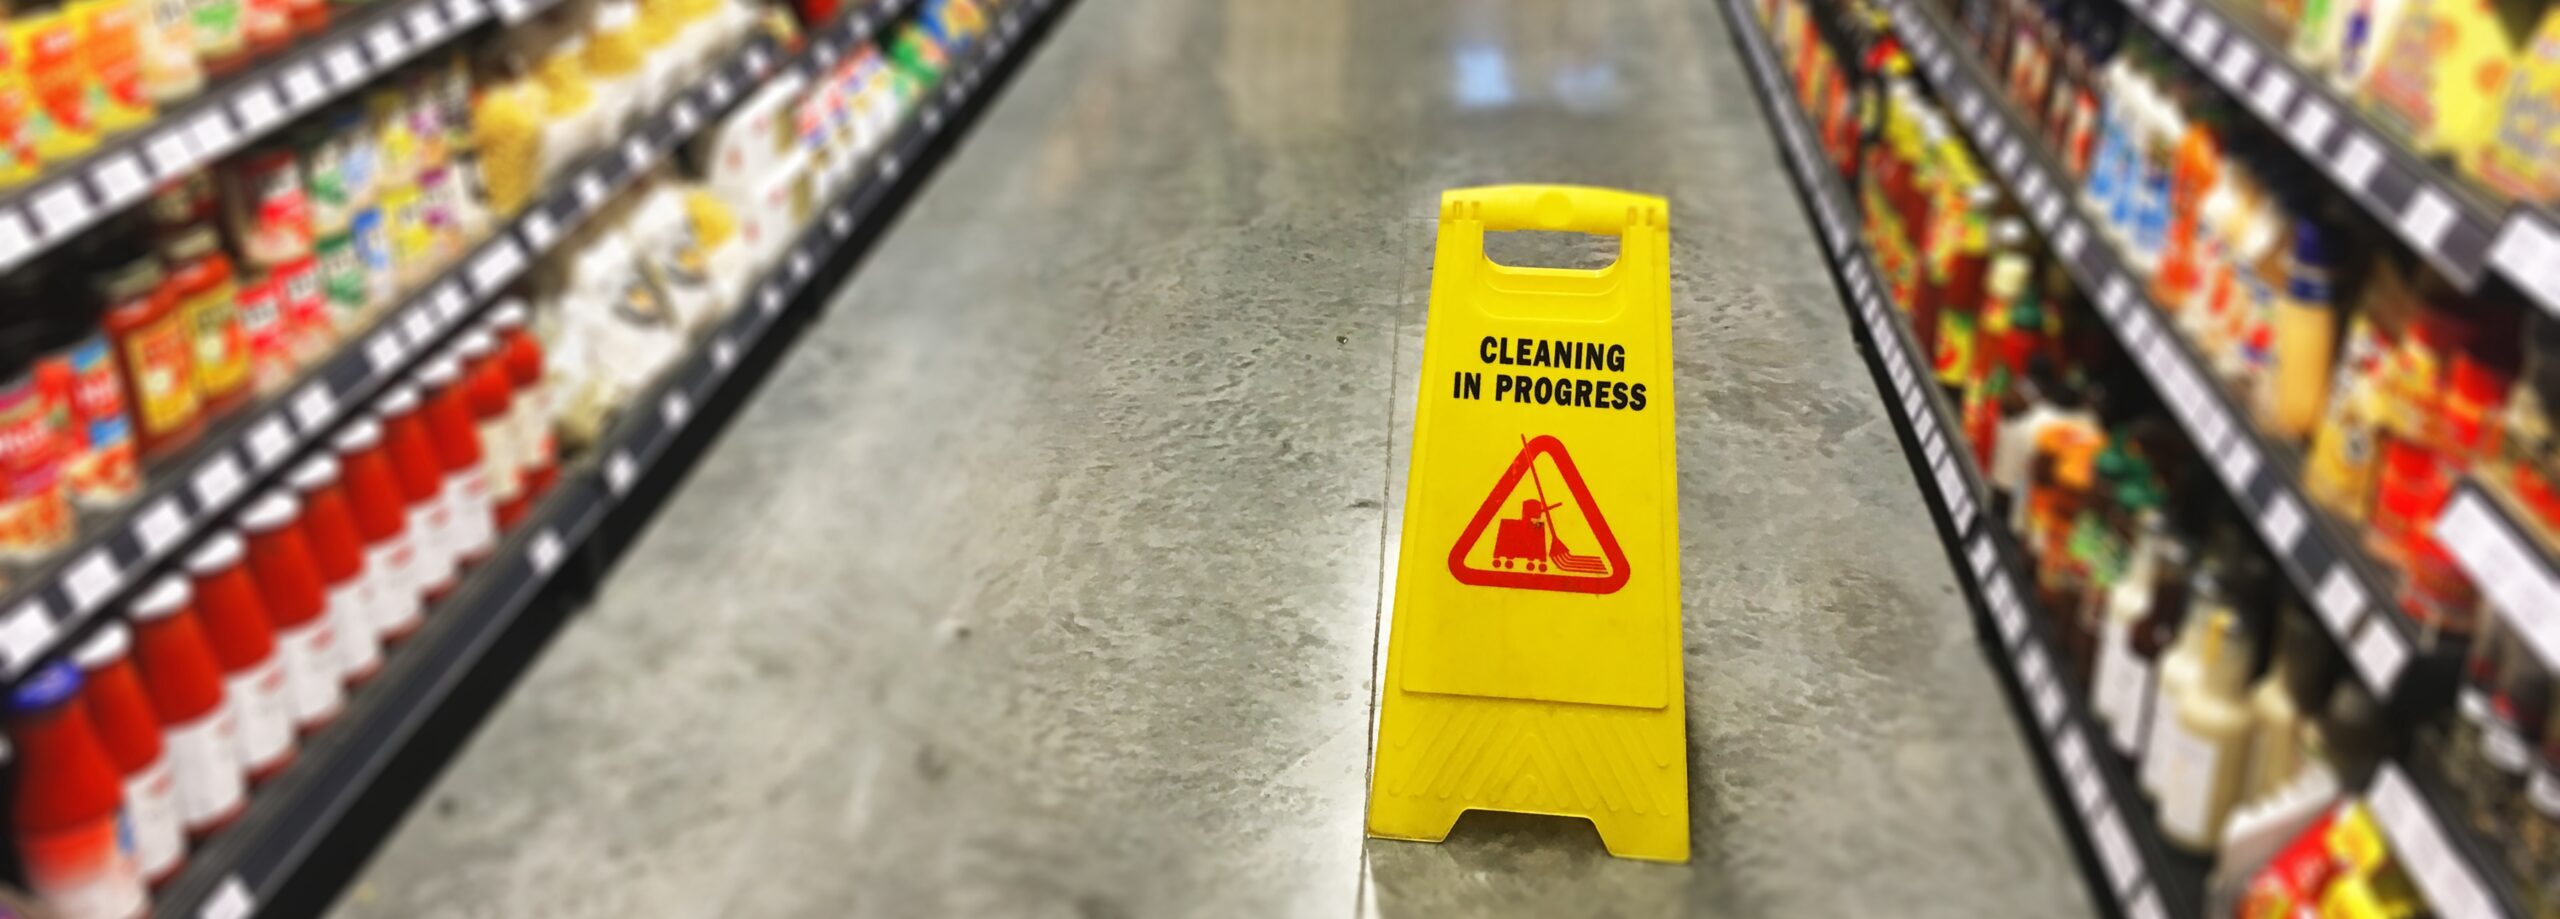 The most common slips, trips and floor hazards associated with the office, warehousing, retail and hospitality industries are wet floors